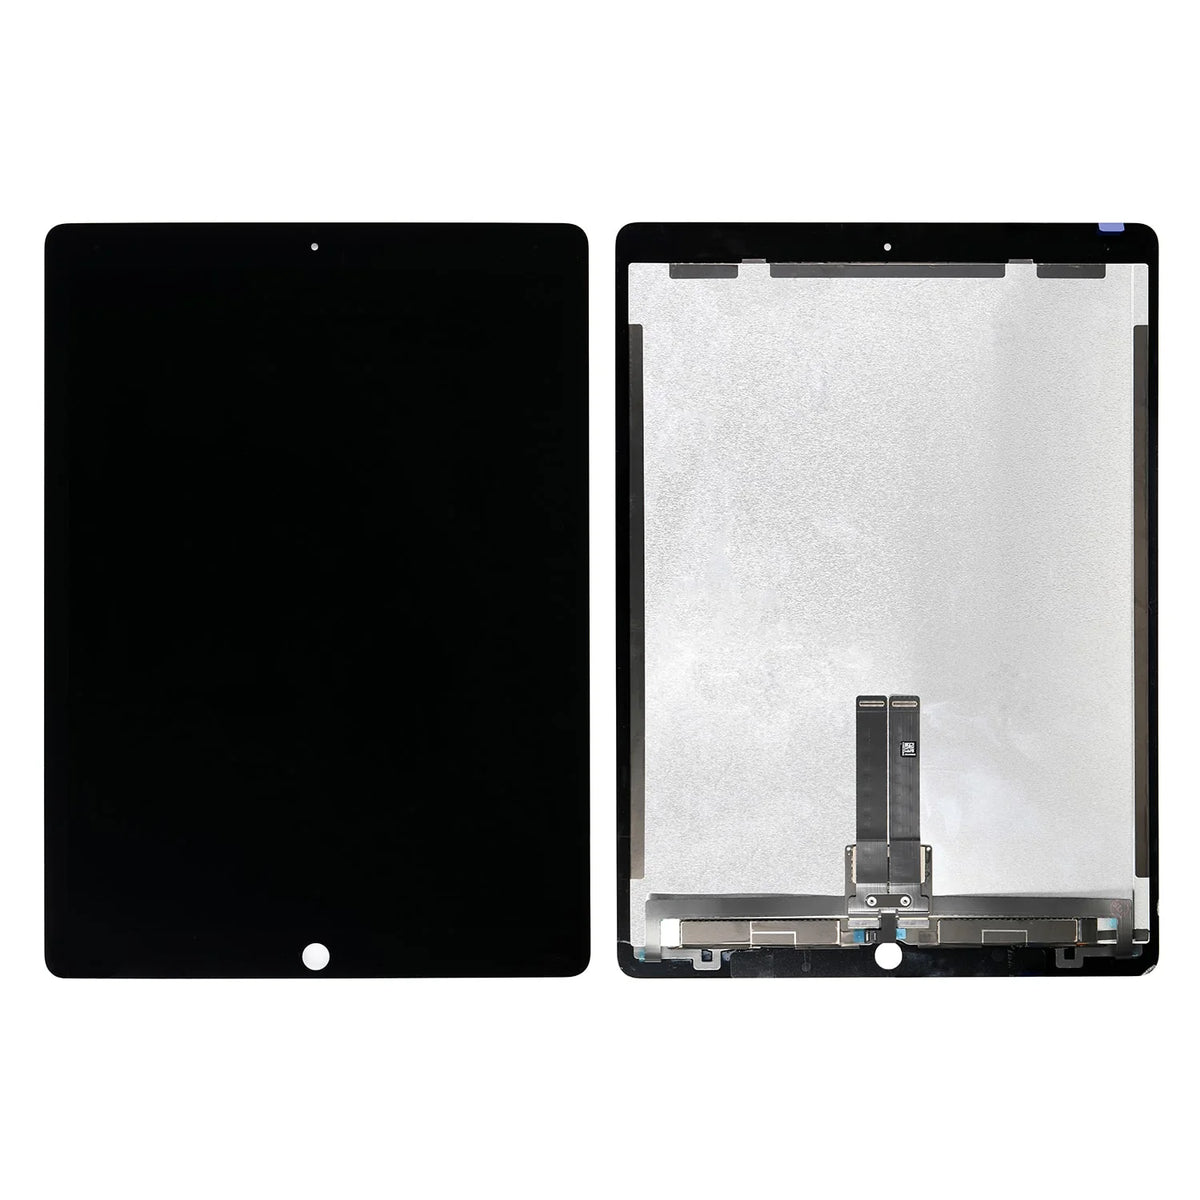 Ipad Pro 12.9 2nd Generation LCD Screen Replacement